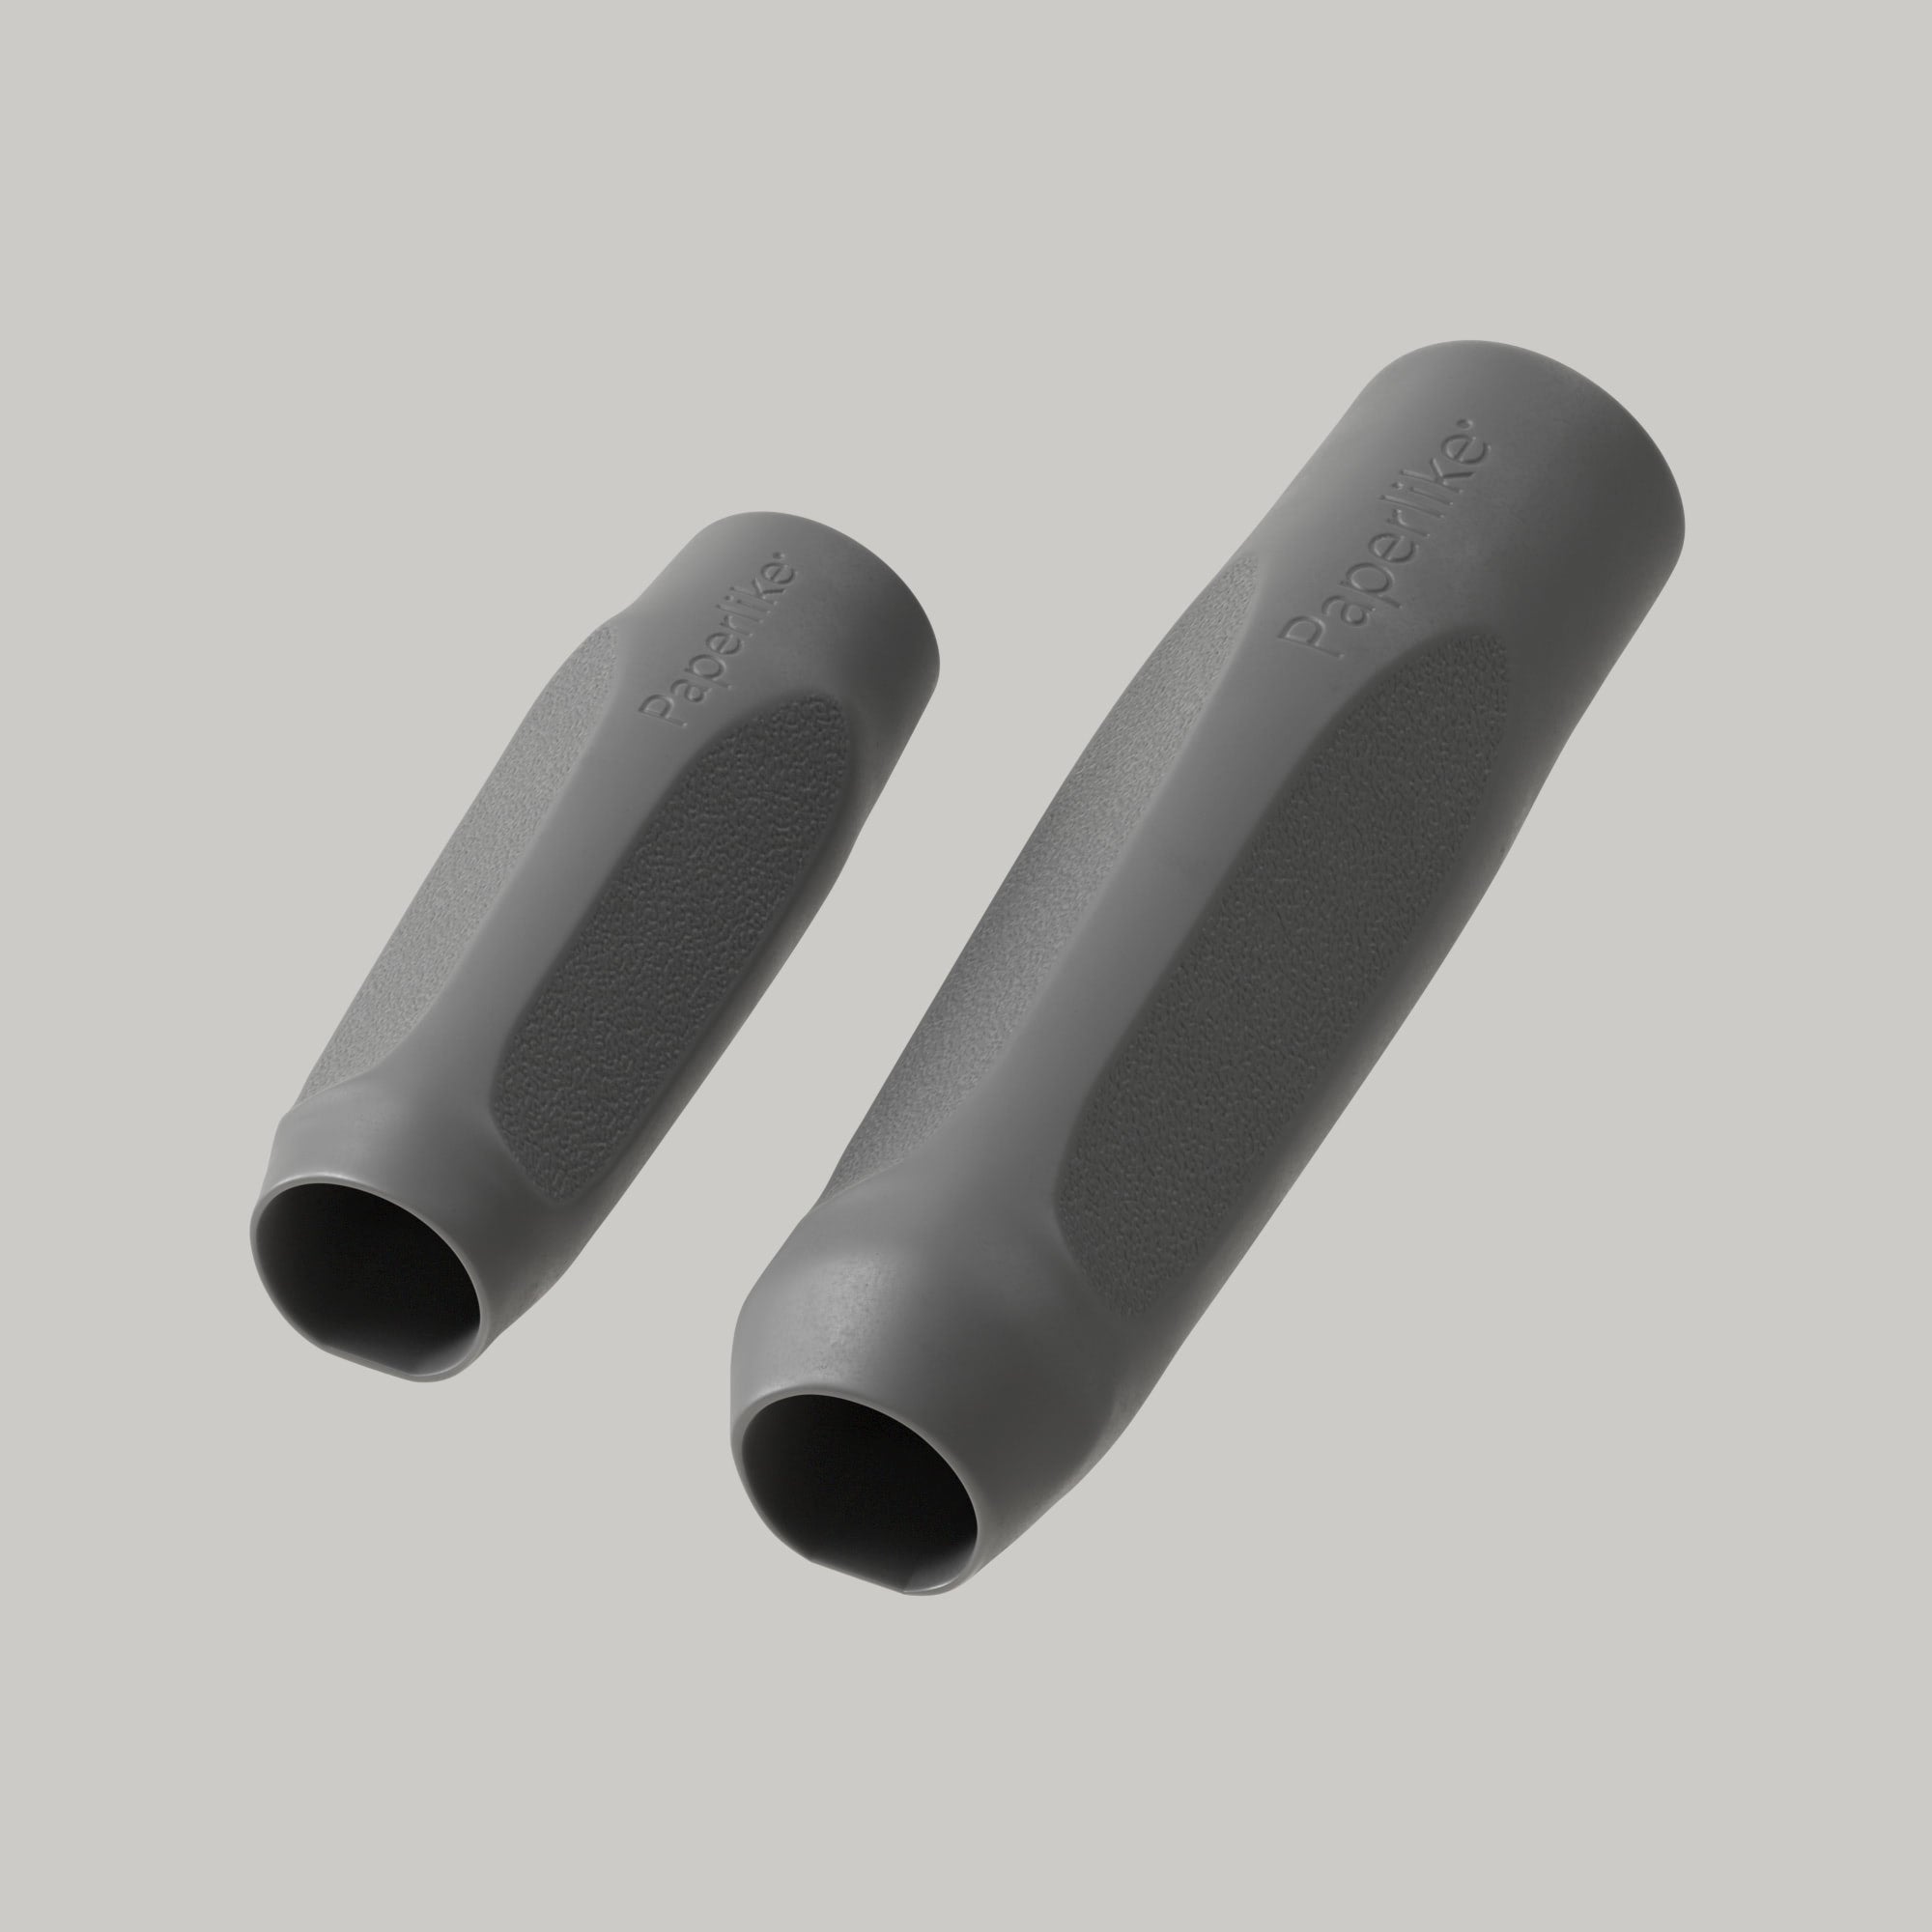 A Maximum Comfort Grip and a Maximum Precision Grip, both part of Paperlike’s Pencil Grips set, both in charcoal gray, sit next to each other.